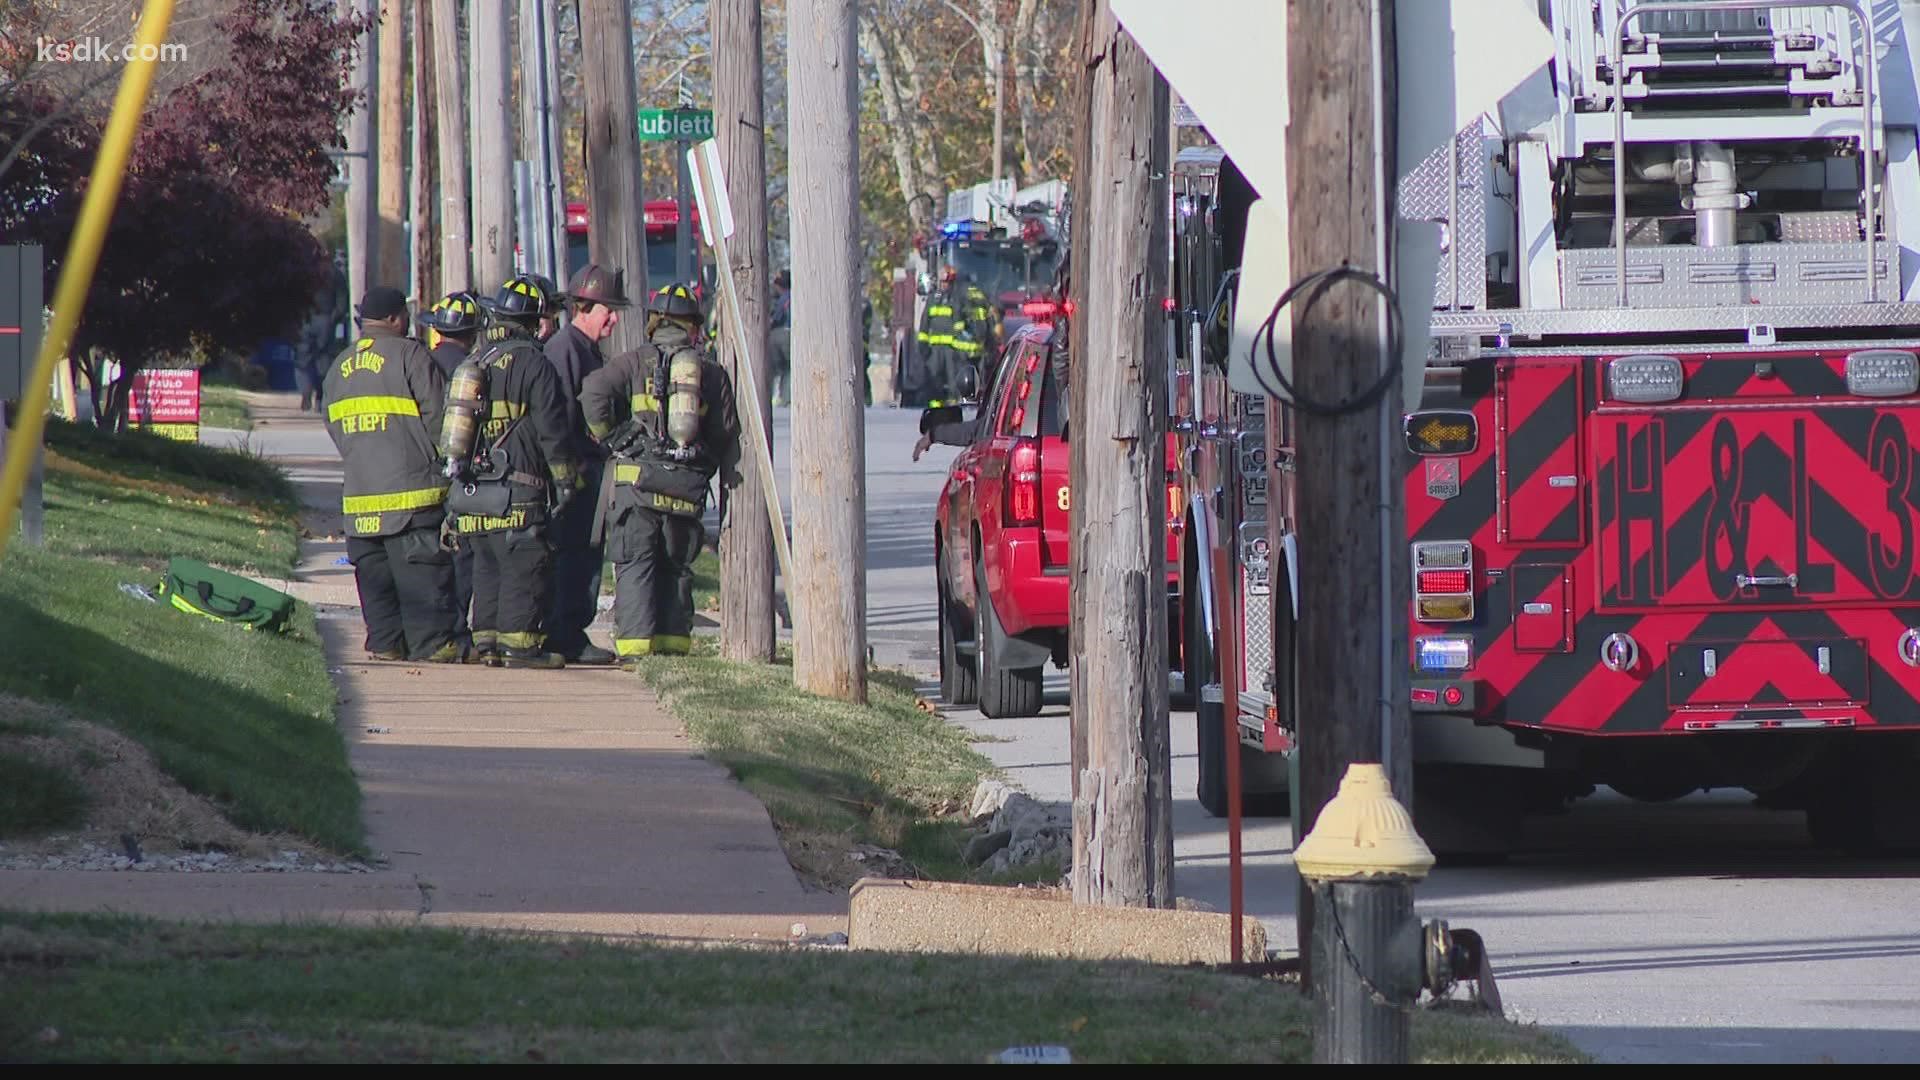 Two people were taken to a hospital with chemical burns after a hazmat situation in St. Louis Tuesday morning.